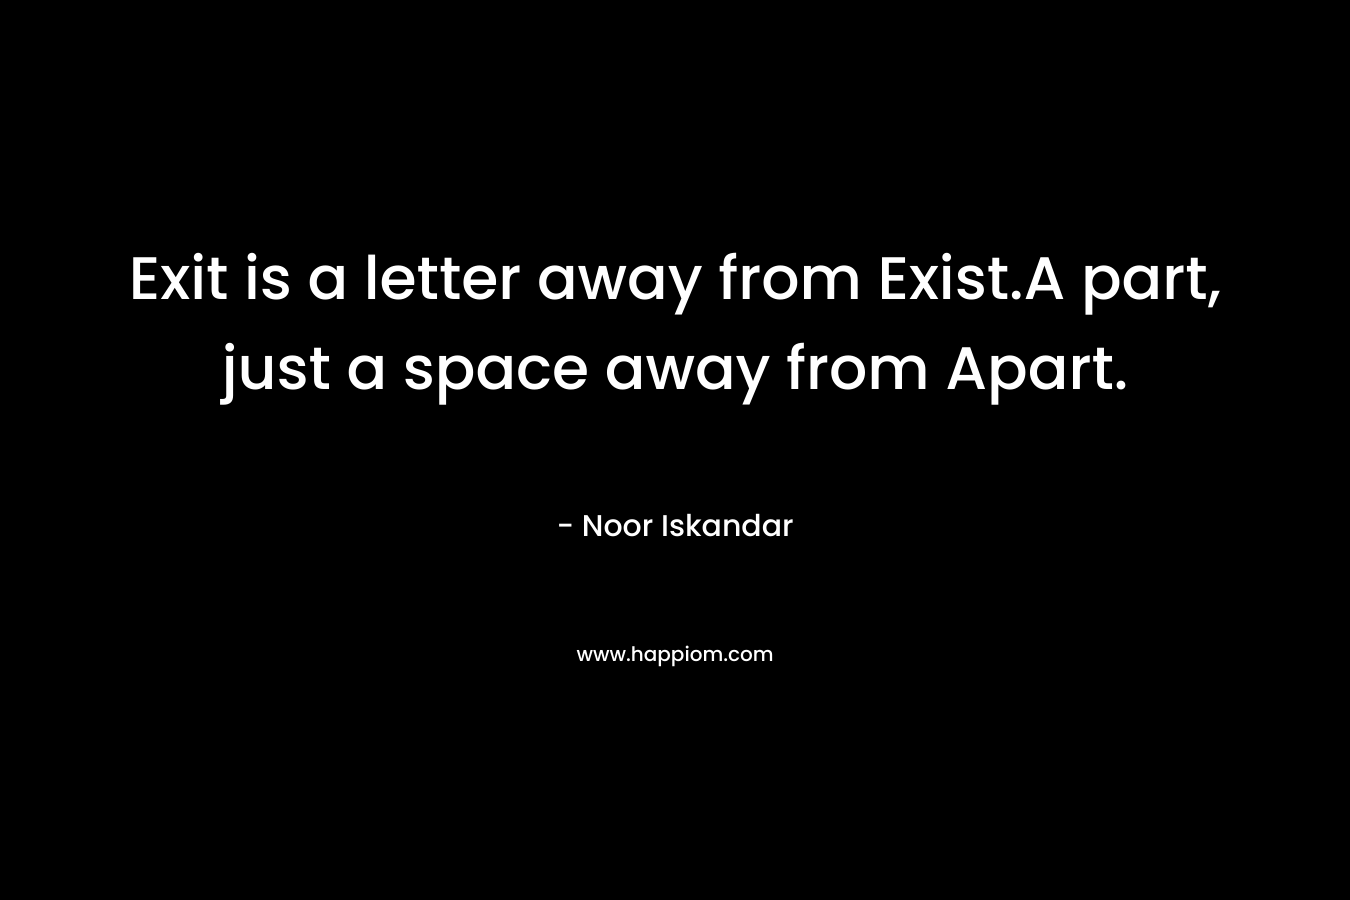 Exit is a letter away from Exist.A part, just a space away from Apart. – Noor Iskandar